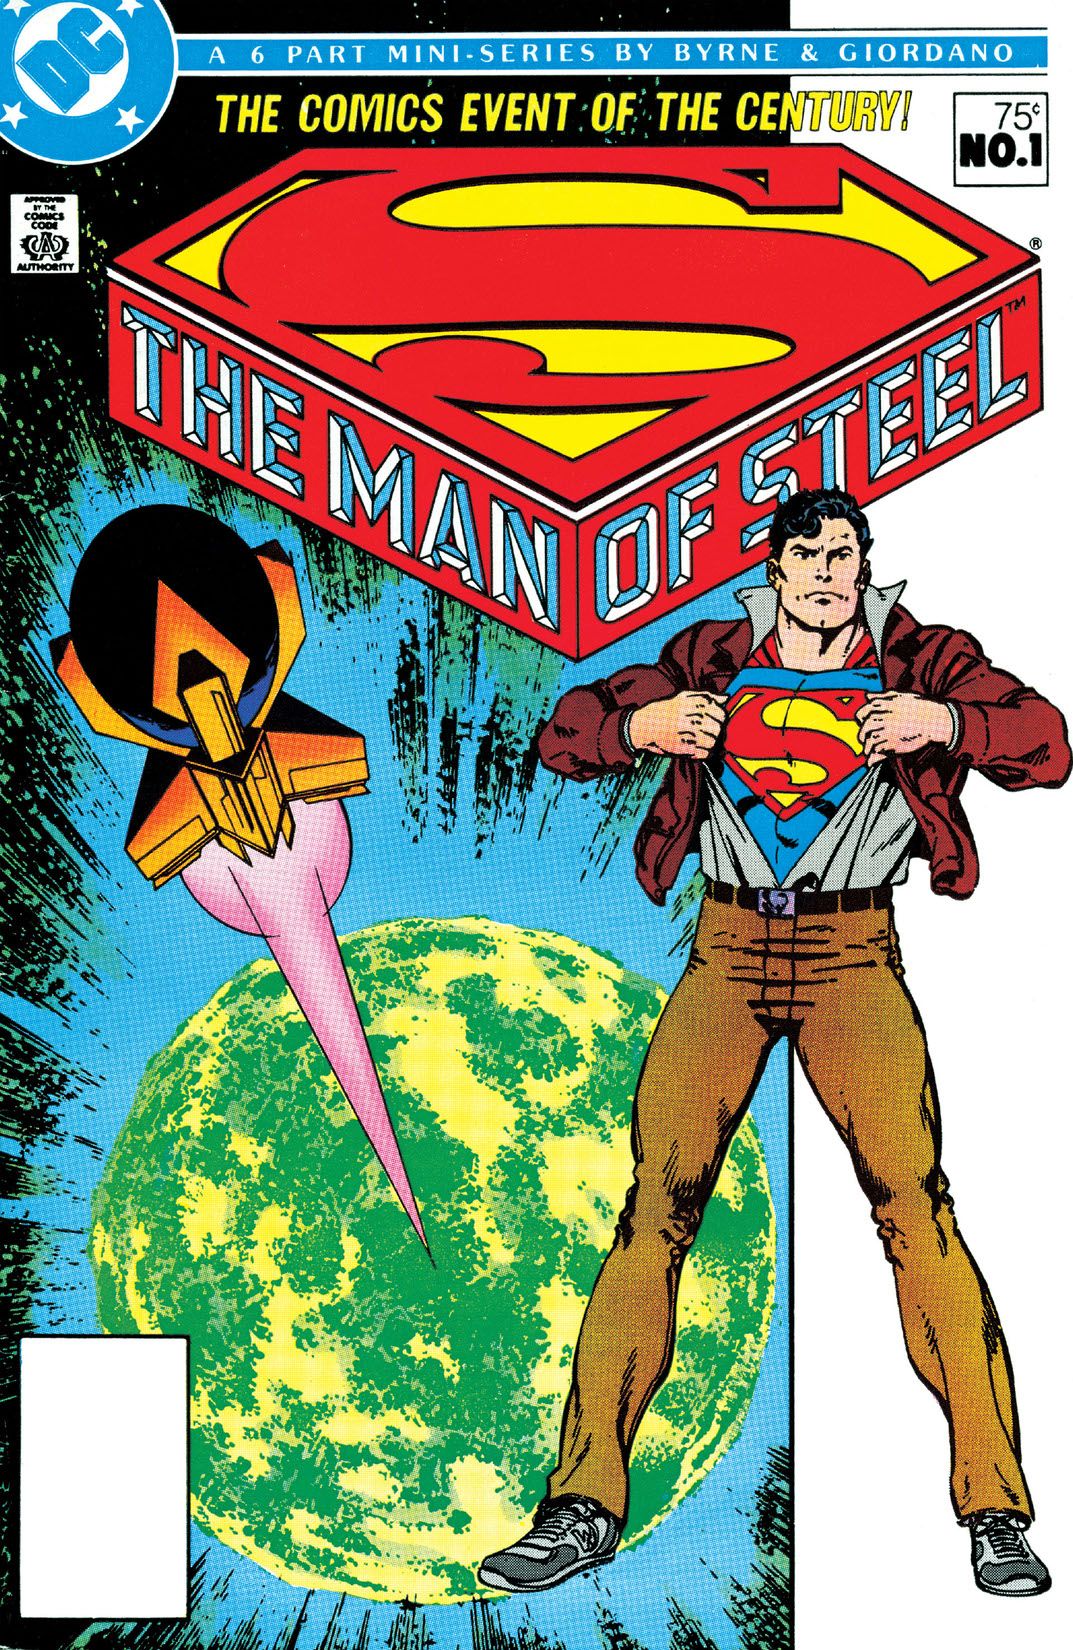 John Byrne rebooted Superman with The Man of Steel